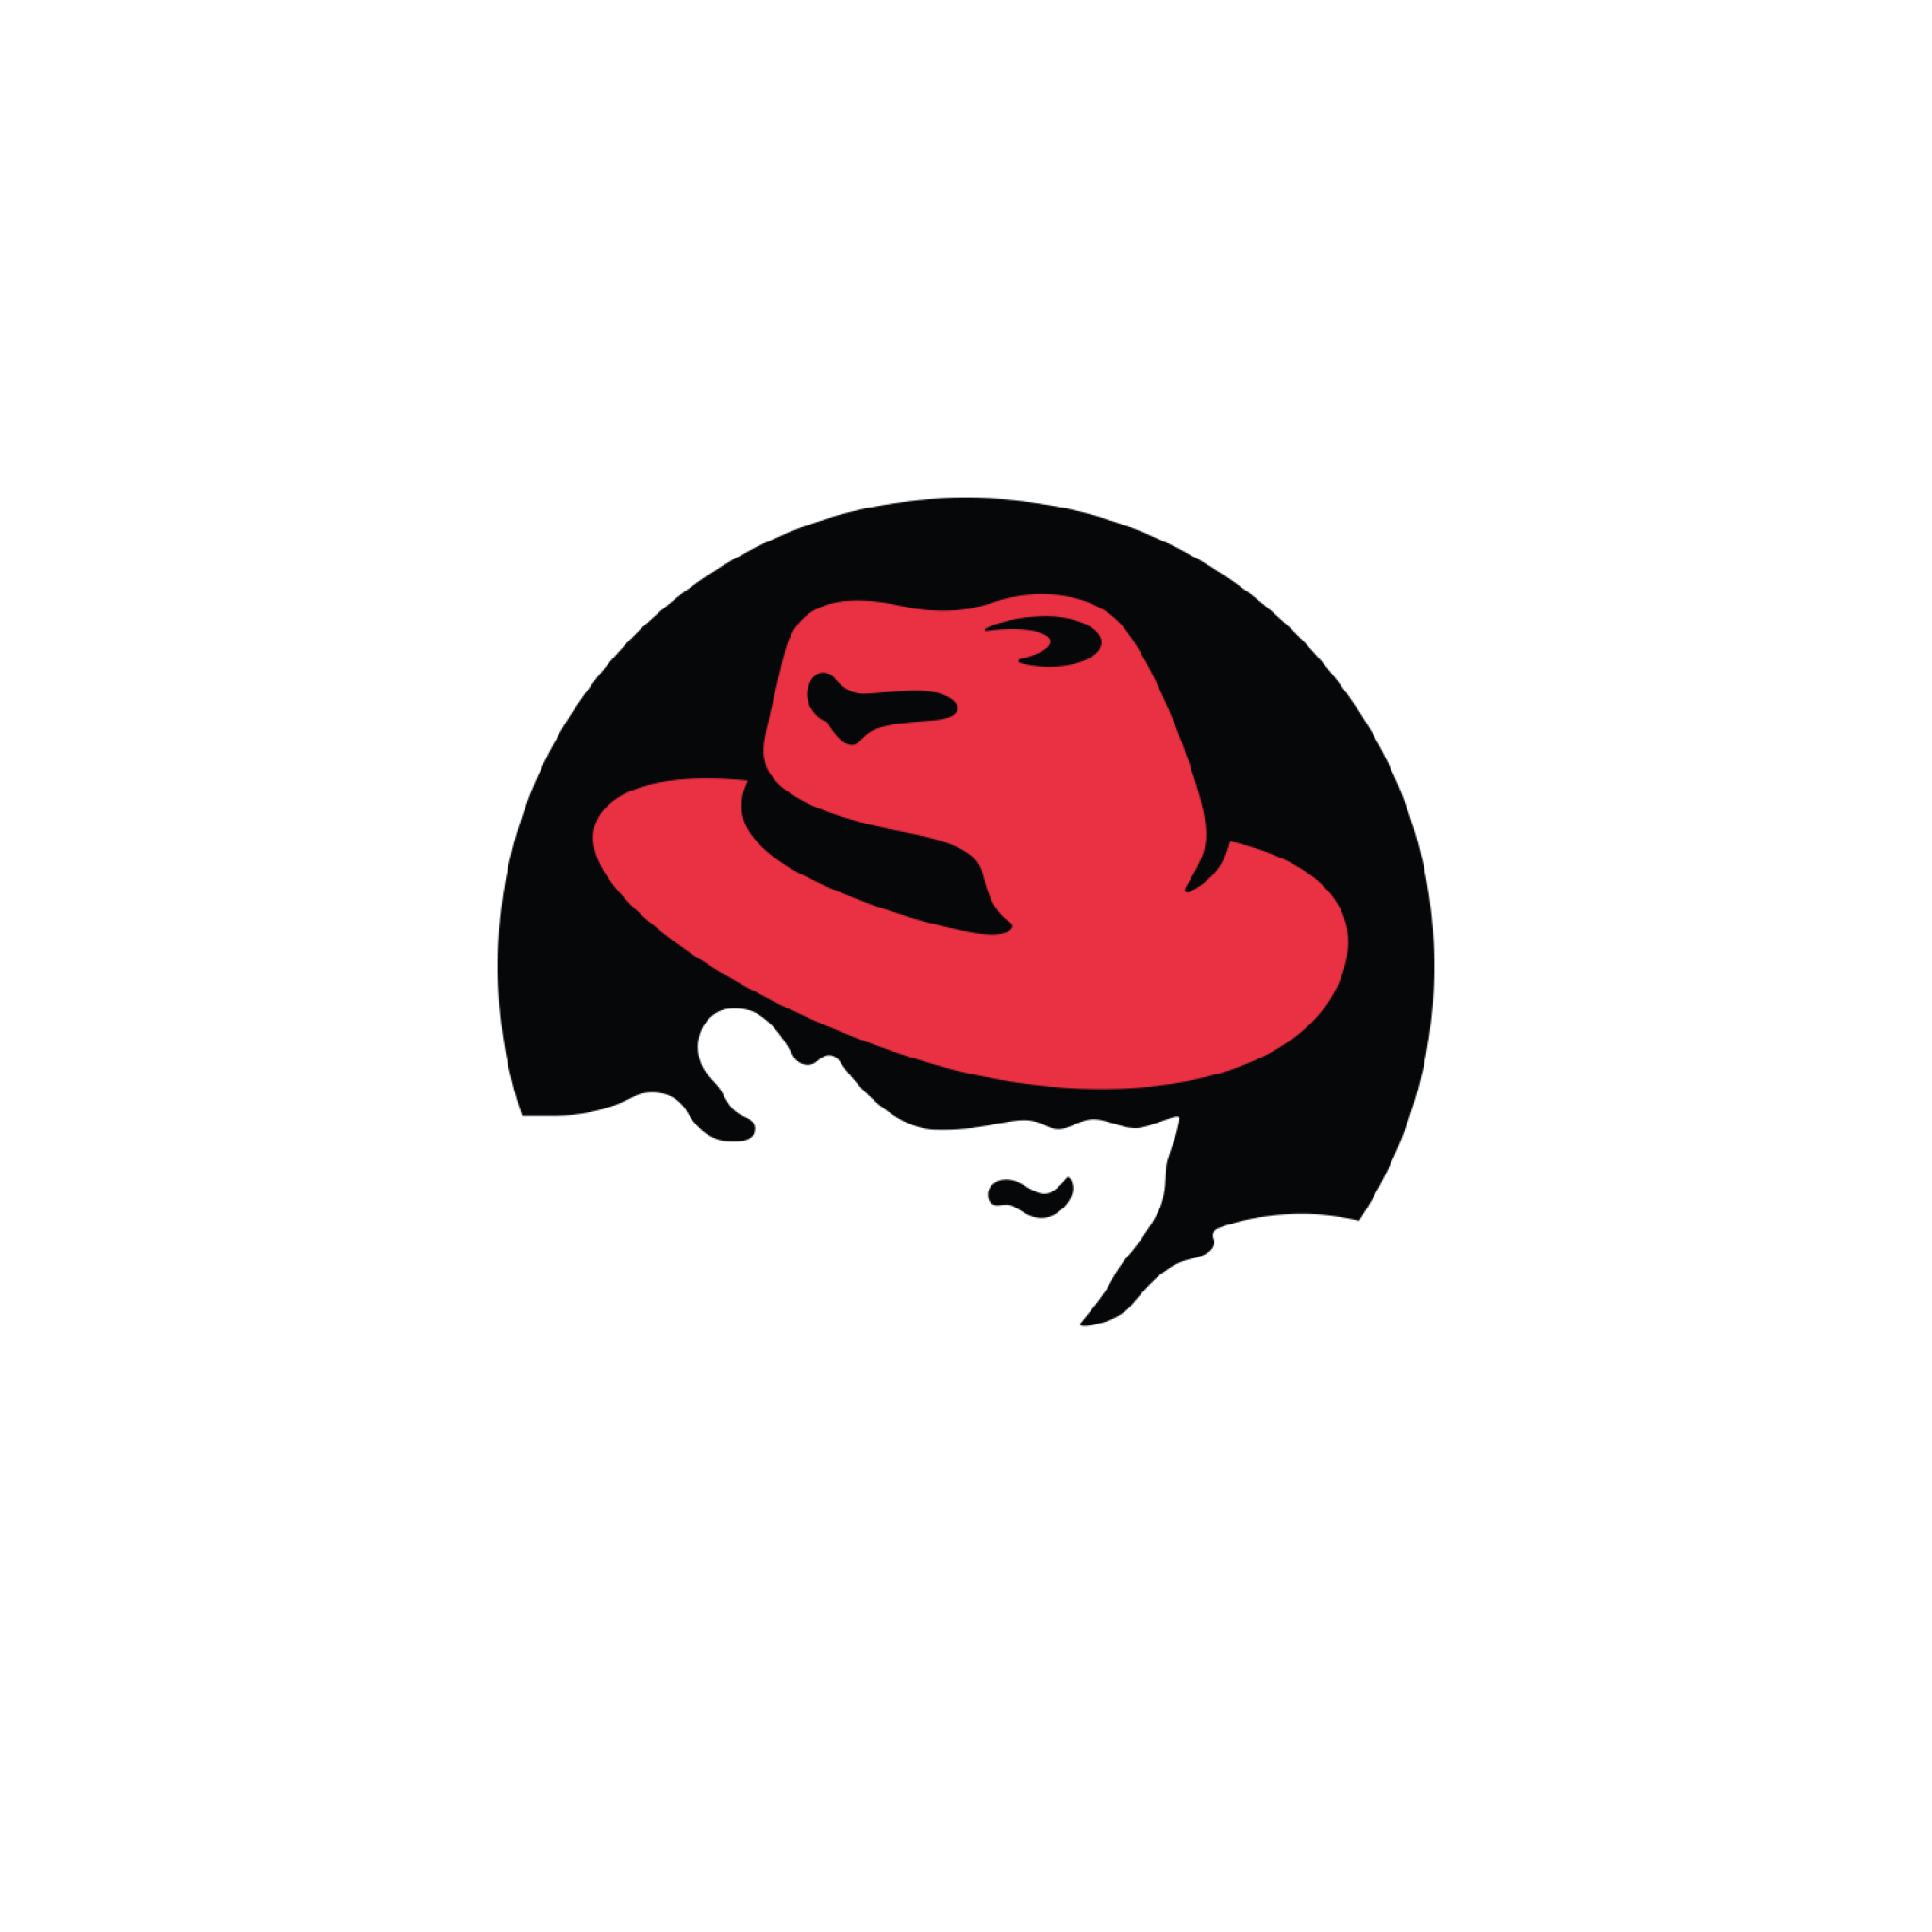 Red hat 7. Red hat логотип. Дистрибутив Red hat. Red hat 9.0. Лого Red hat белый.